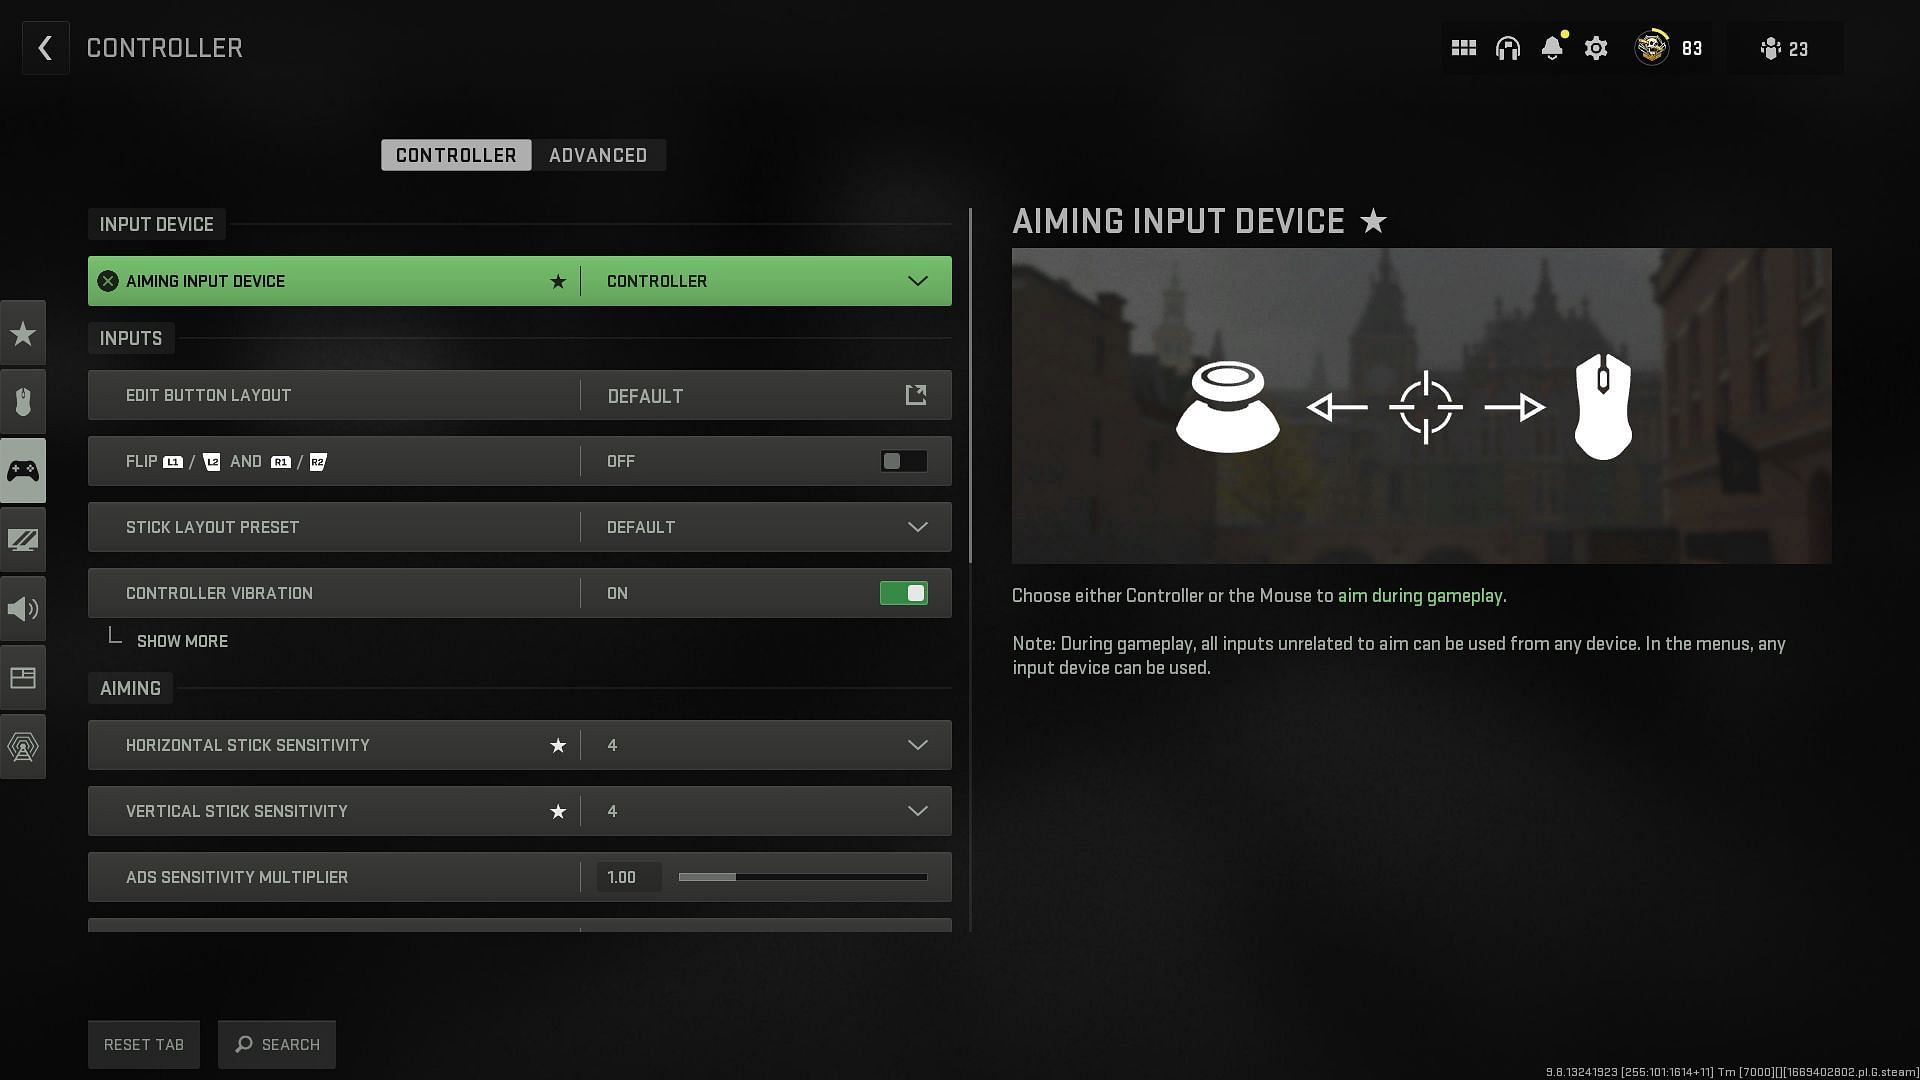 Selecting input device as a controller (Image via Activision)